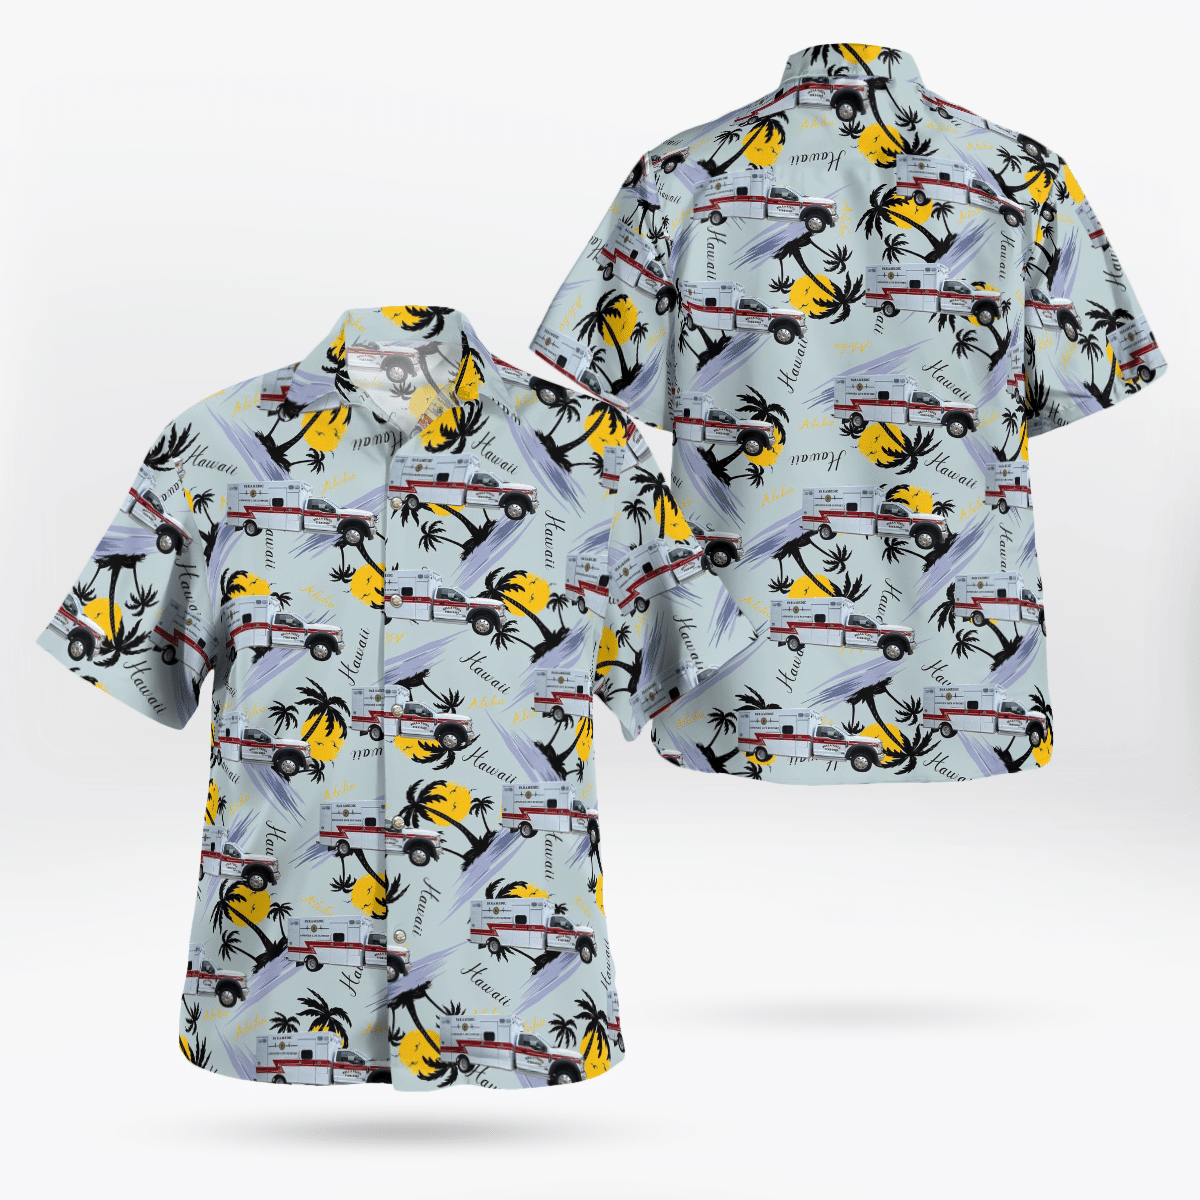 Shop now to find the perfect Hawaii Shirt for your hobby 96